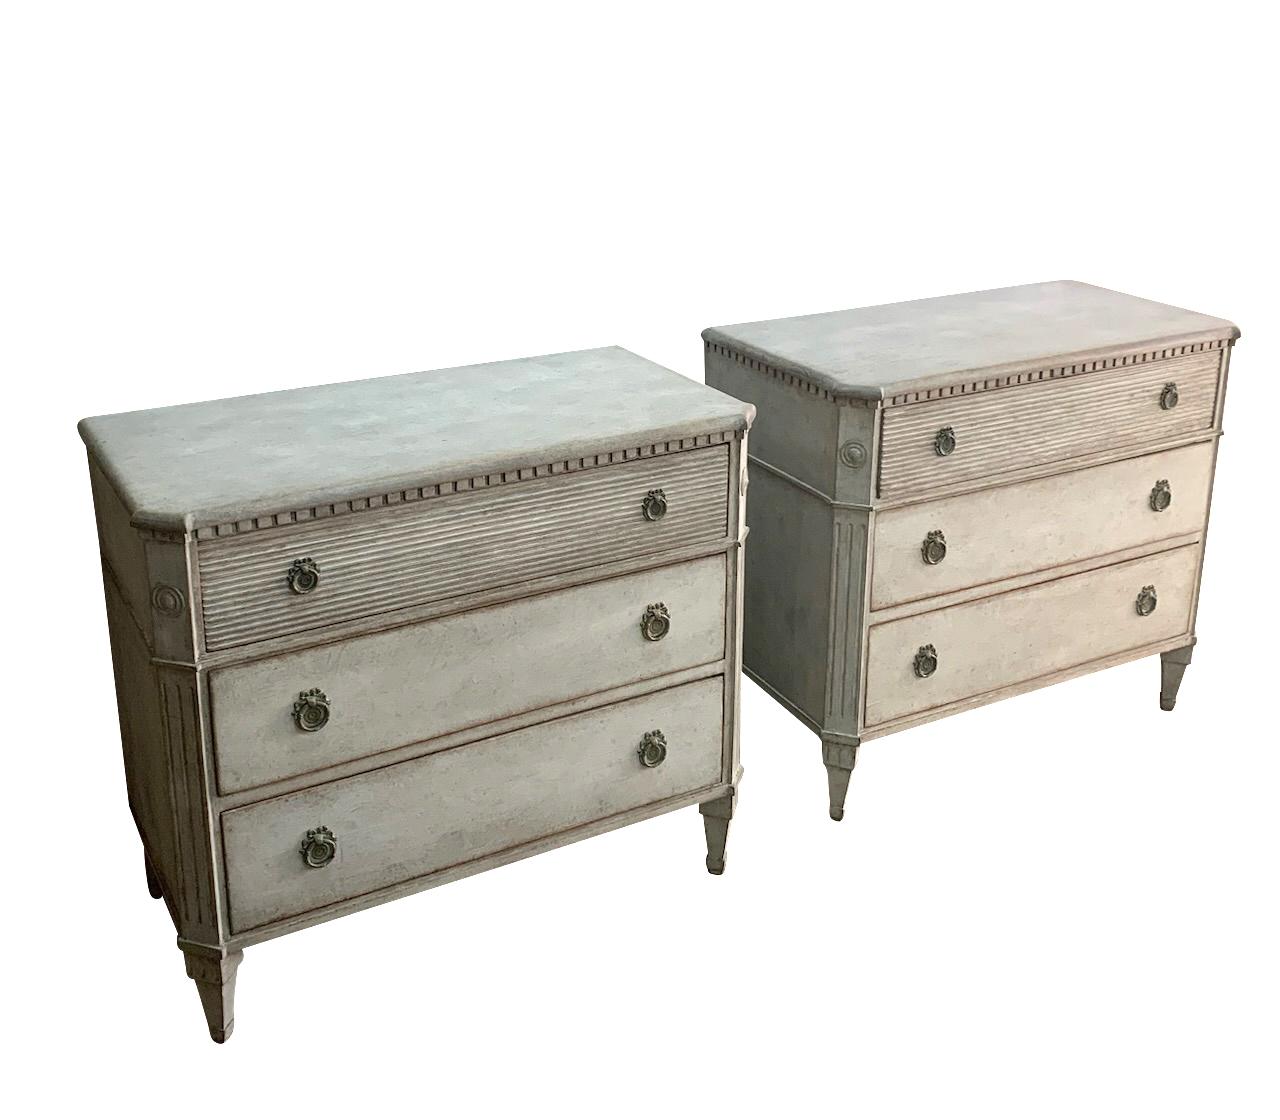 1870c Swedish pair of Gustavian style commodes.
Light grey in color.
Three drawers.
Top drawer with decorative reed design.
Dental molding along cornice.
Original hardware.
Newly completely restored.
ARRIVING MARCH.